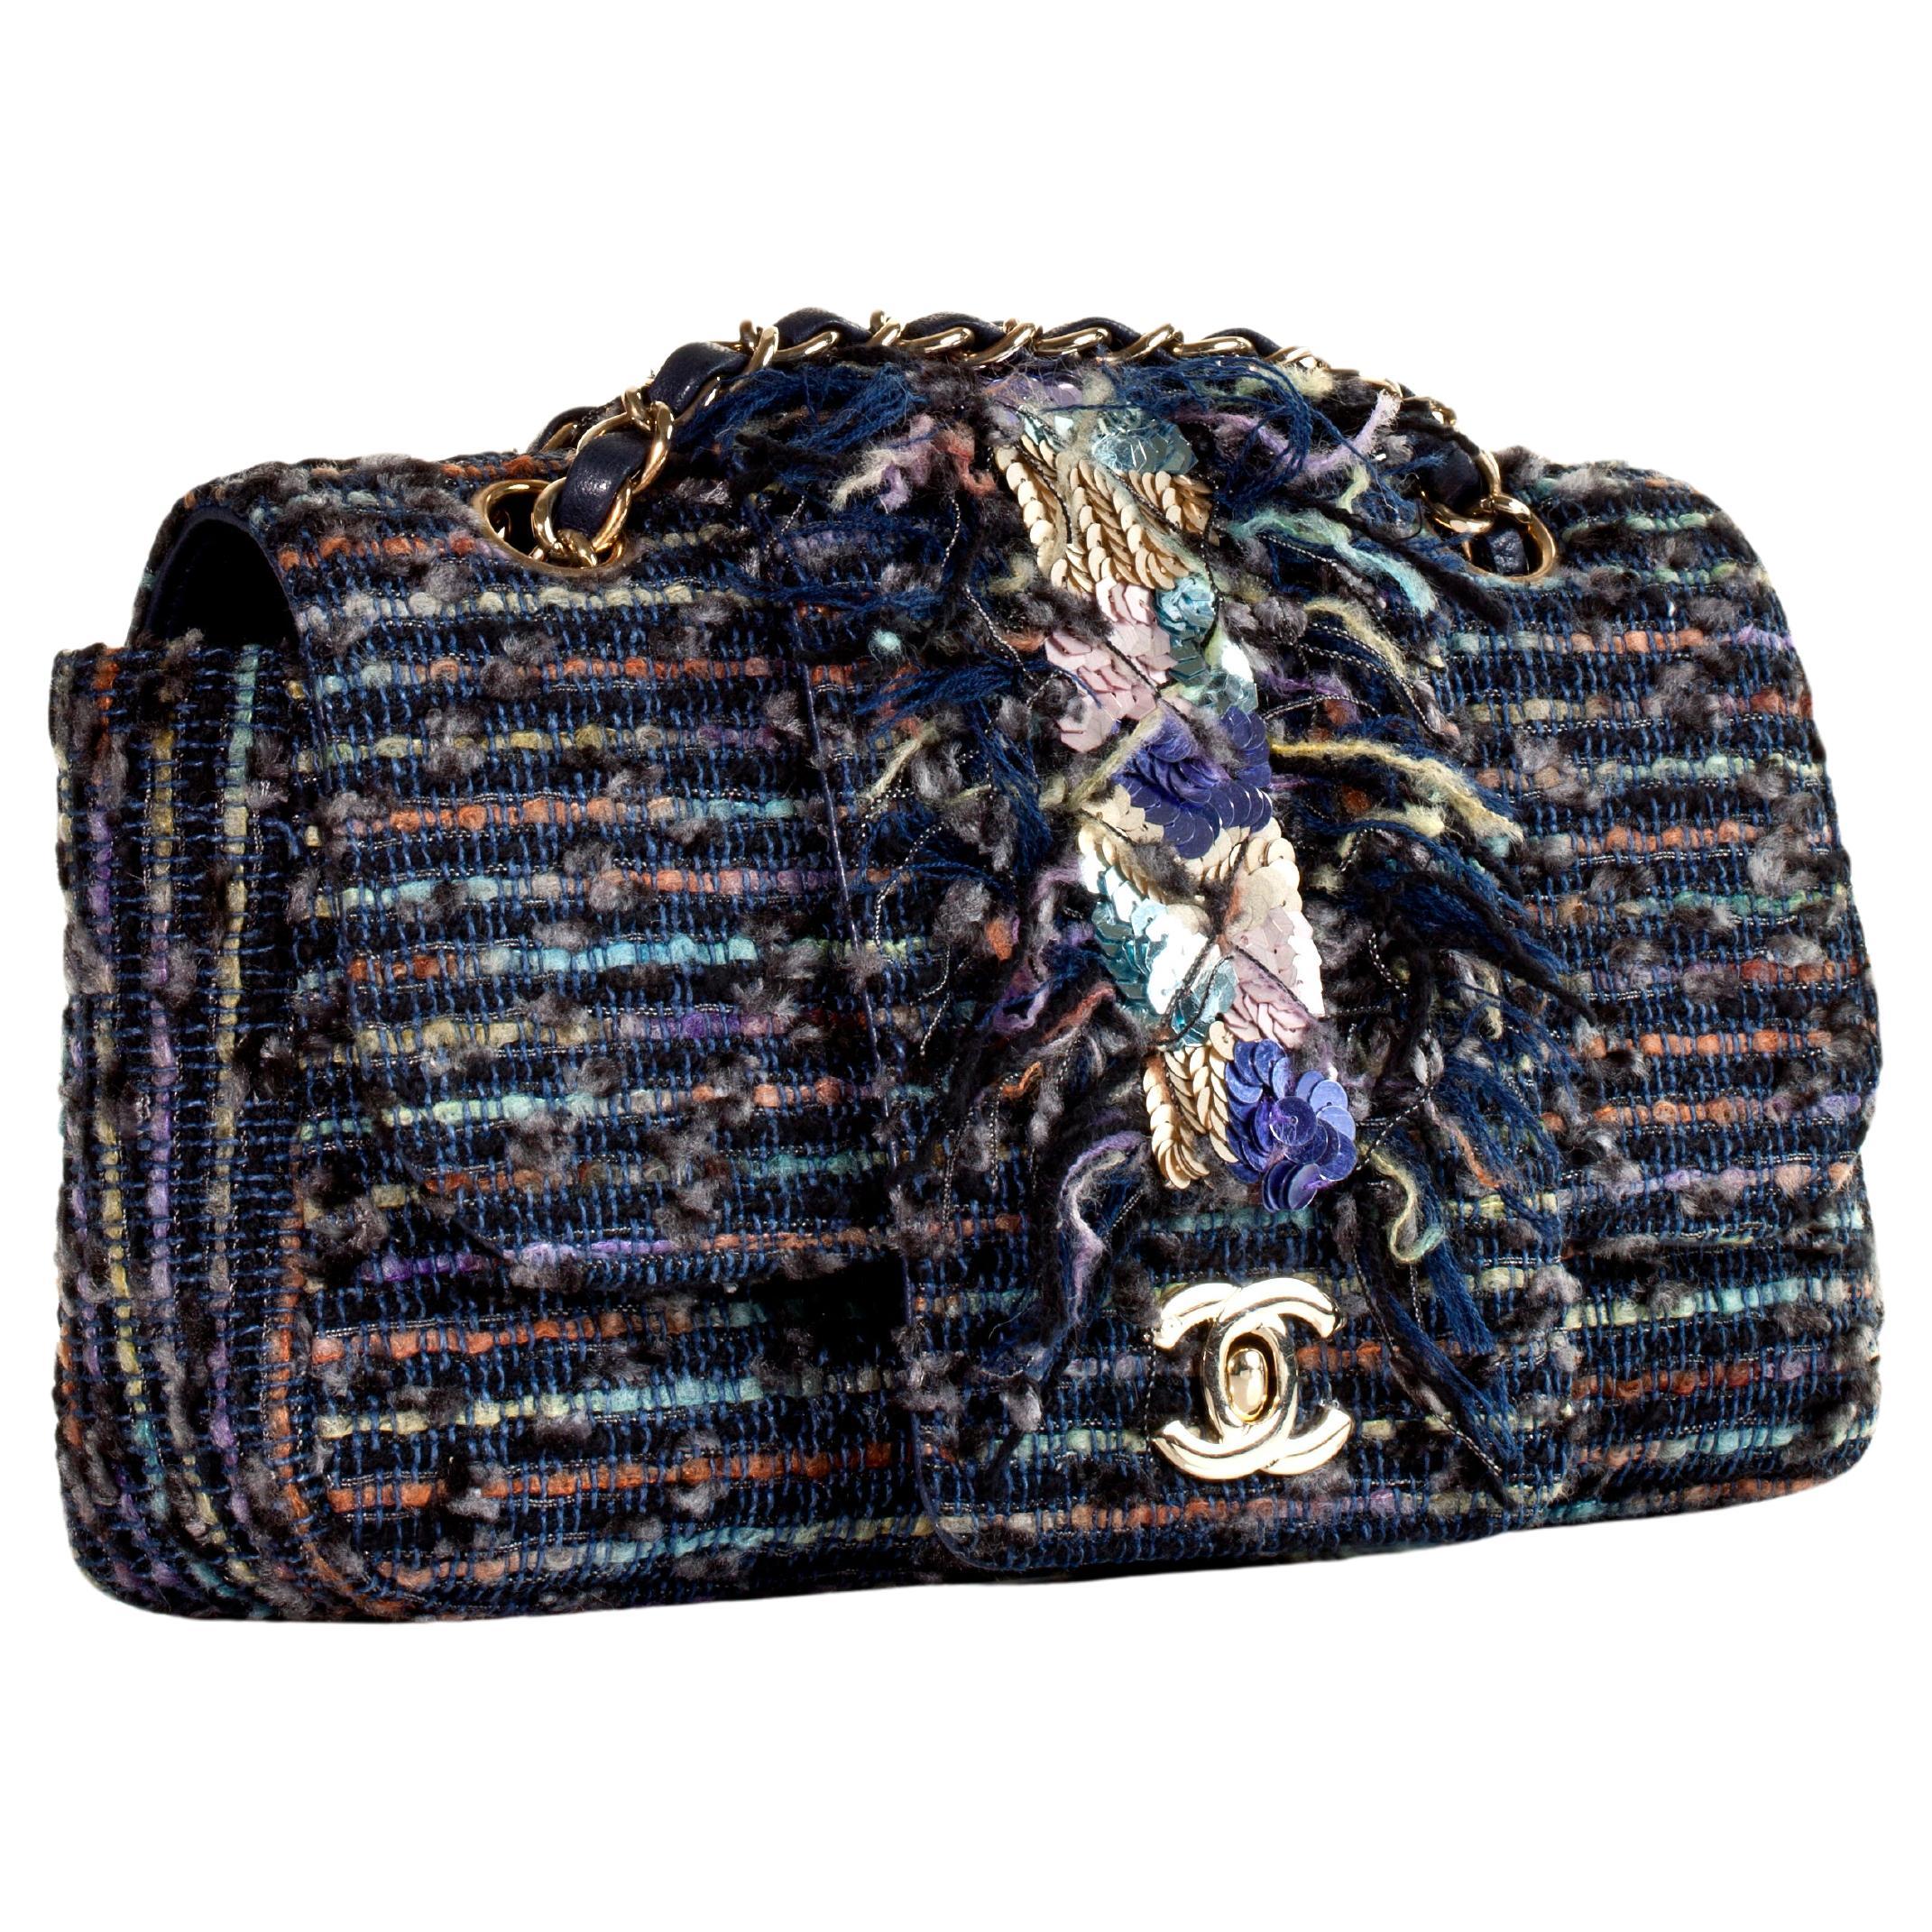 Chanel 2005 Classic Flap Vintage Jeweled Sequin Mermaid Navy Blue Tweed Bag For Sale